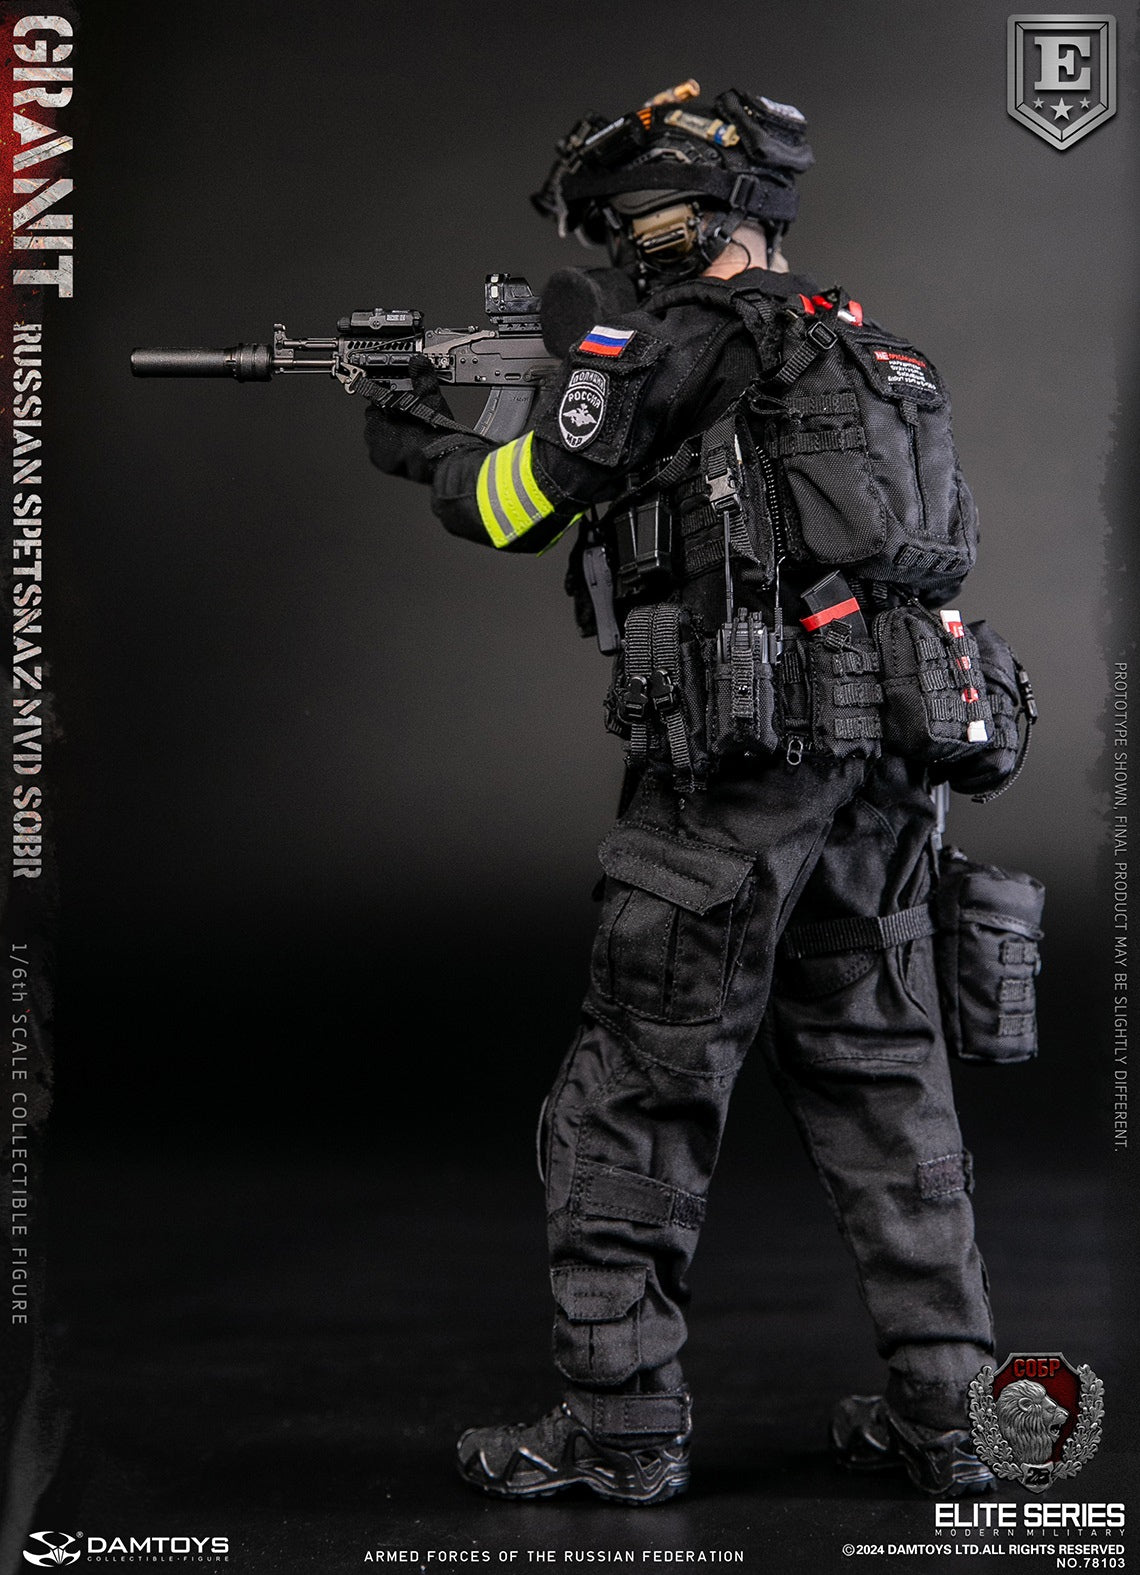 Damtoys - 78103 - Elite Series - Armed Forces of the Russian Federation: SPETSNAZ MVD SOBR Granit (Elite ed.) (1/6 Scale) - Marvelous Toys